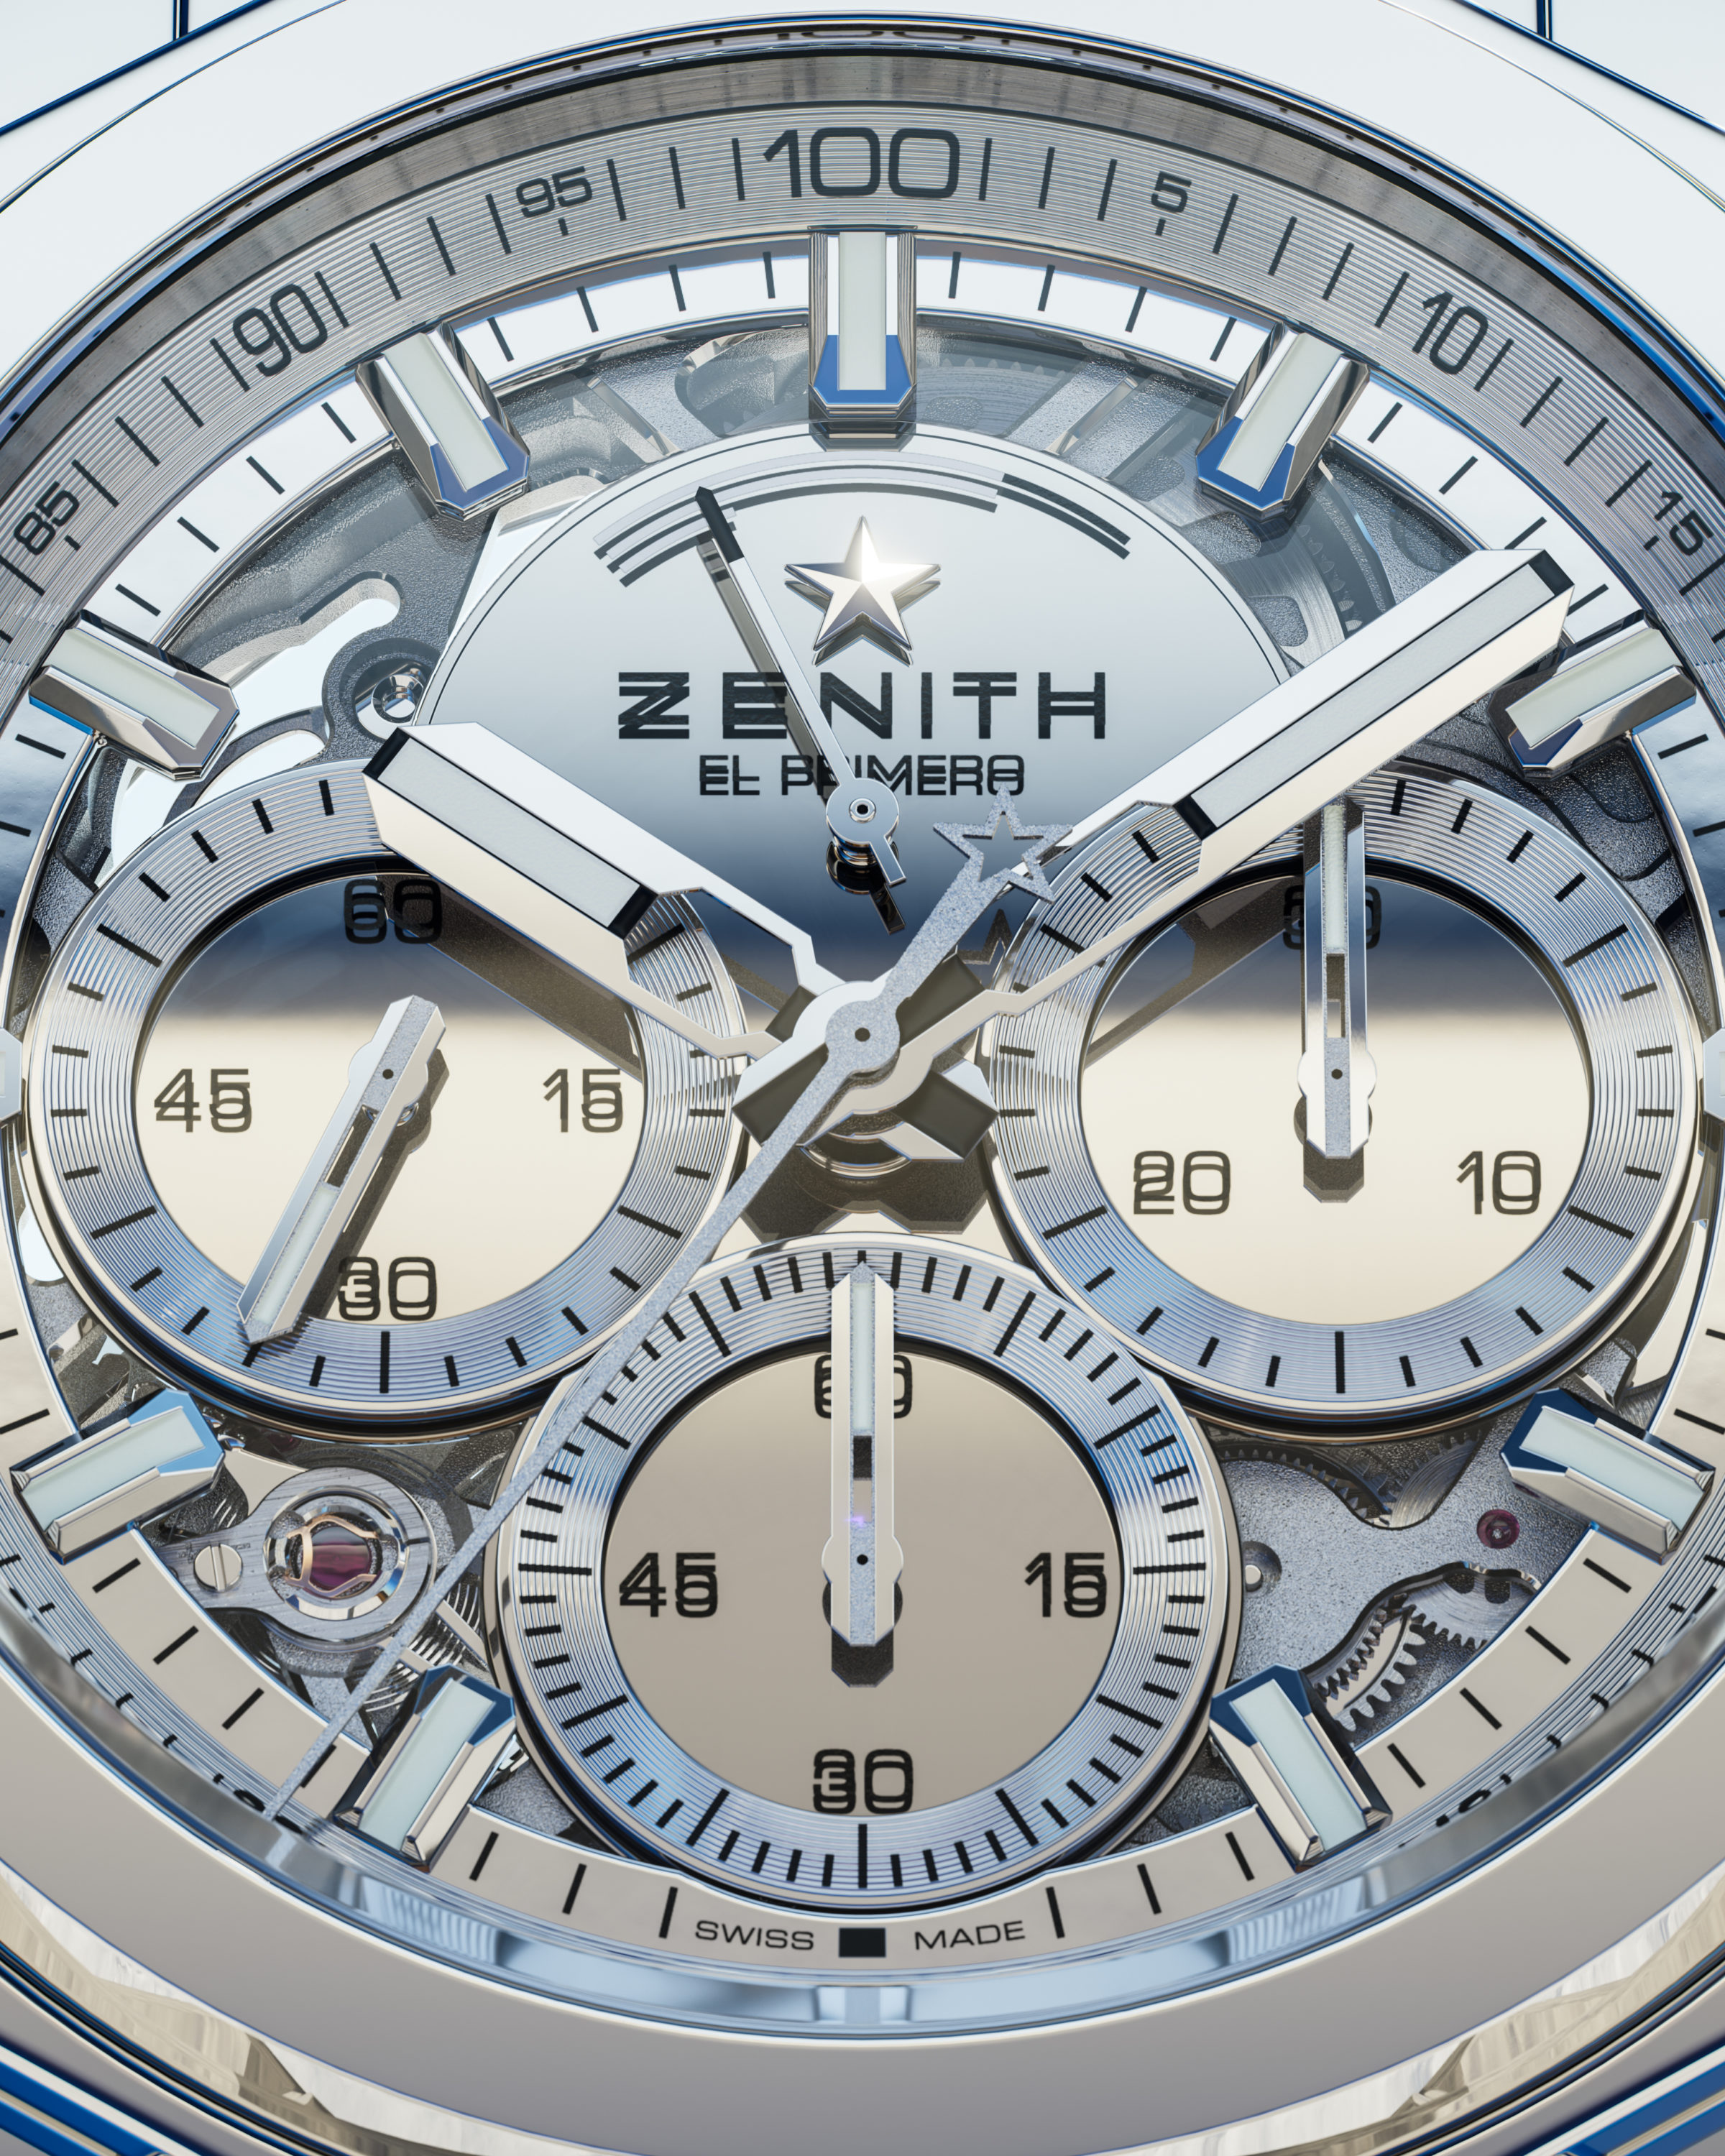 Mirror, Mirror on the Wall: Zenith Launches Stunning Variant of